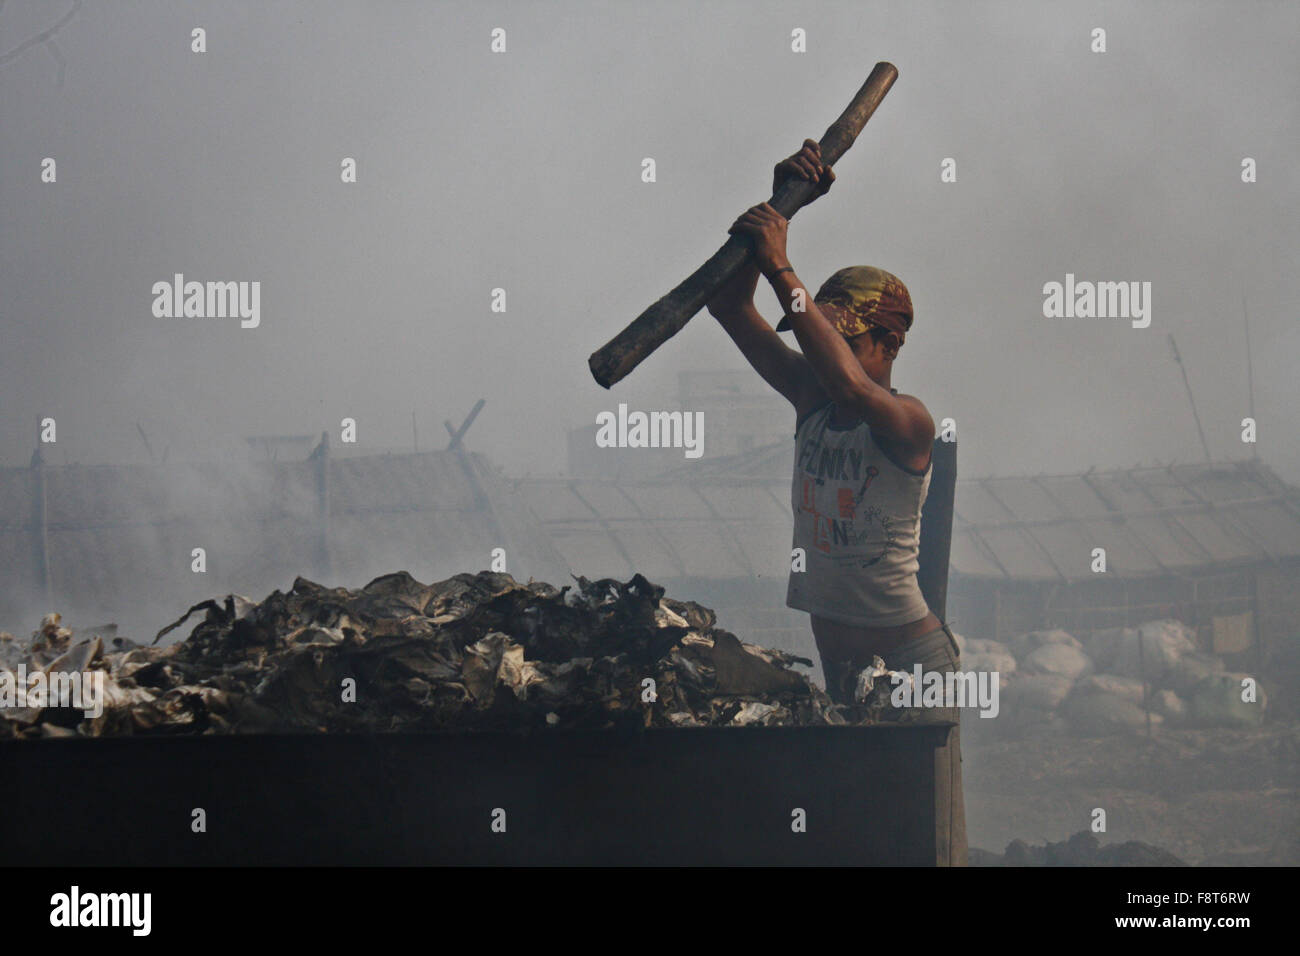 A Bangladeshi day labor works in the polluted environment at Hazaribagh tannery area in Dhaka, Bangladesh. Stock Photo